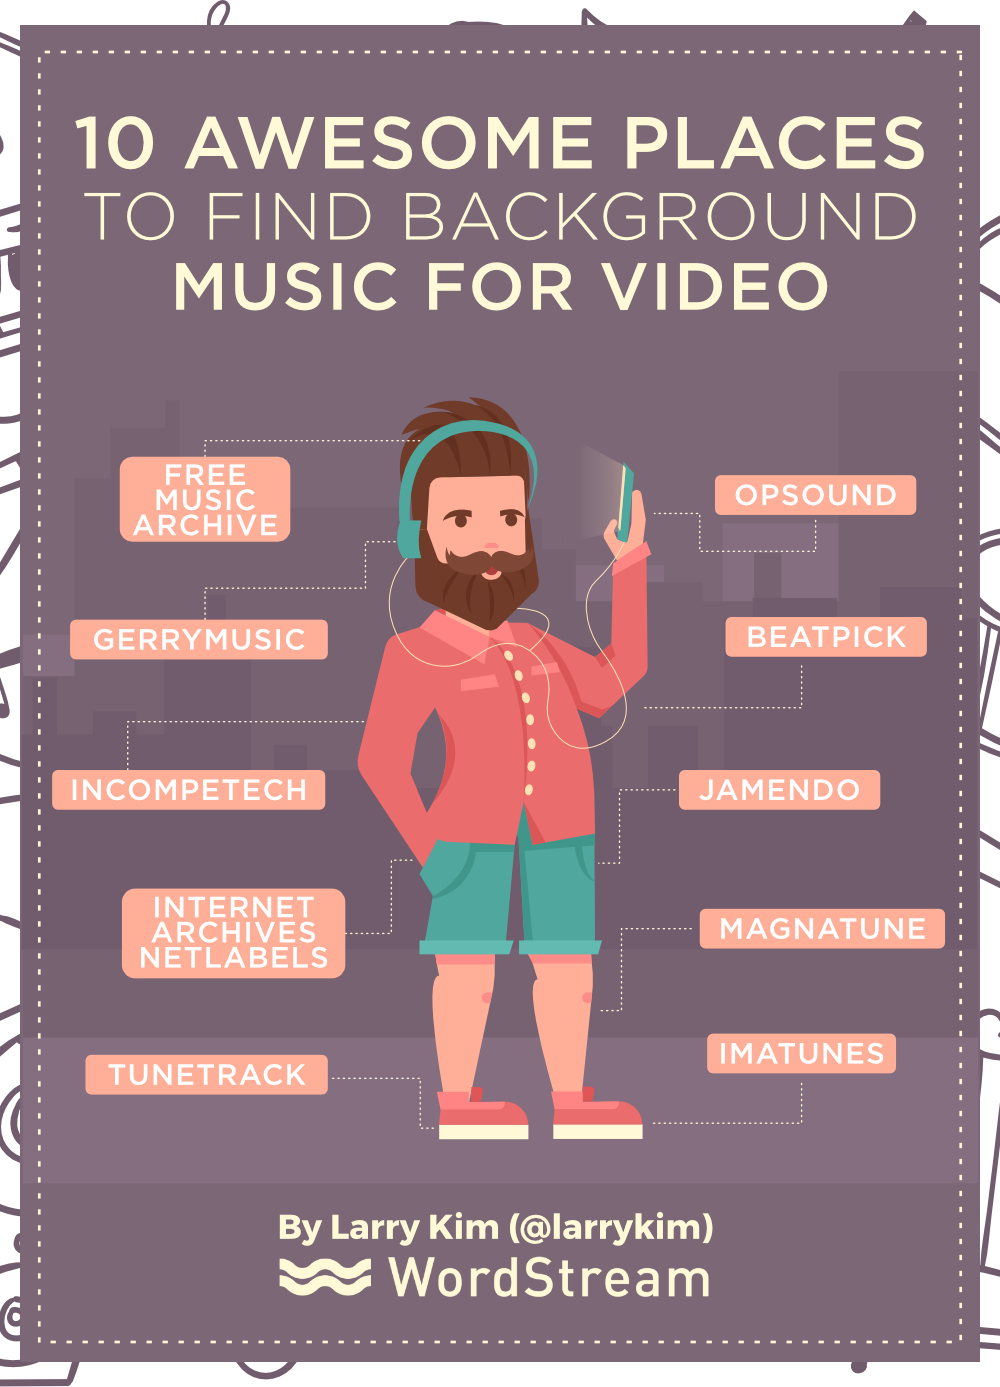 10 Awesome Places to Find Background Music for Video | by Larry Kim |   | Medium